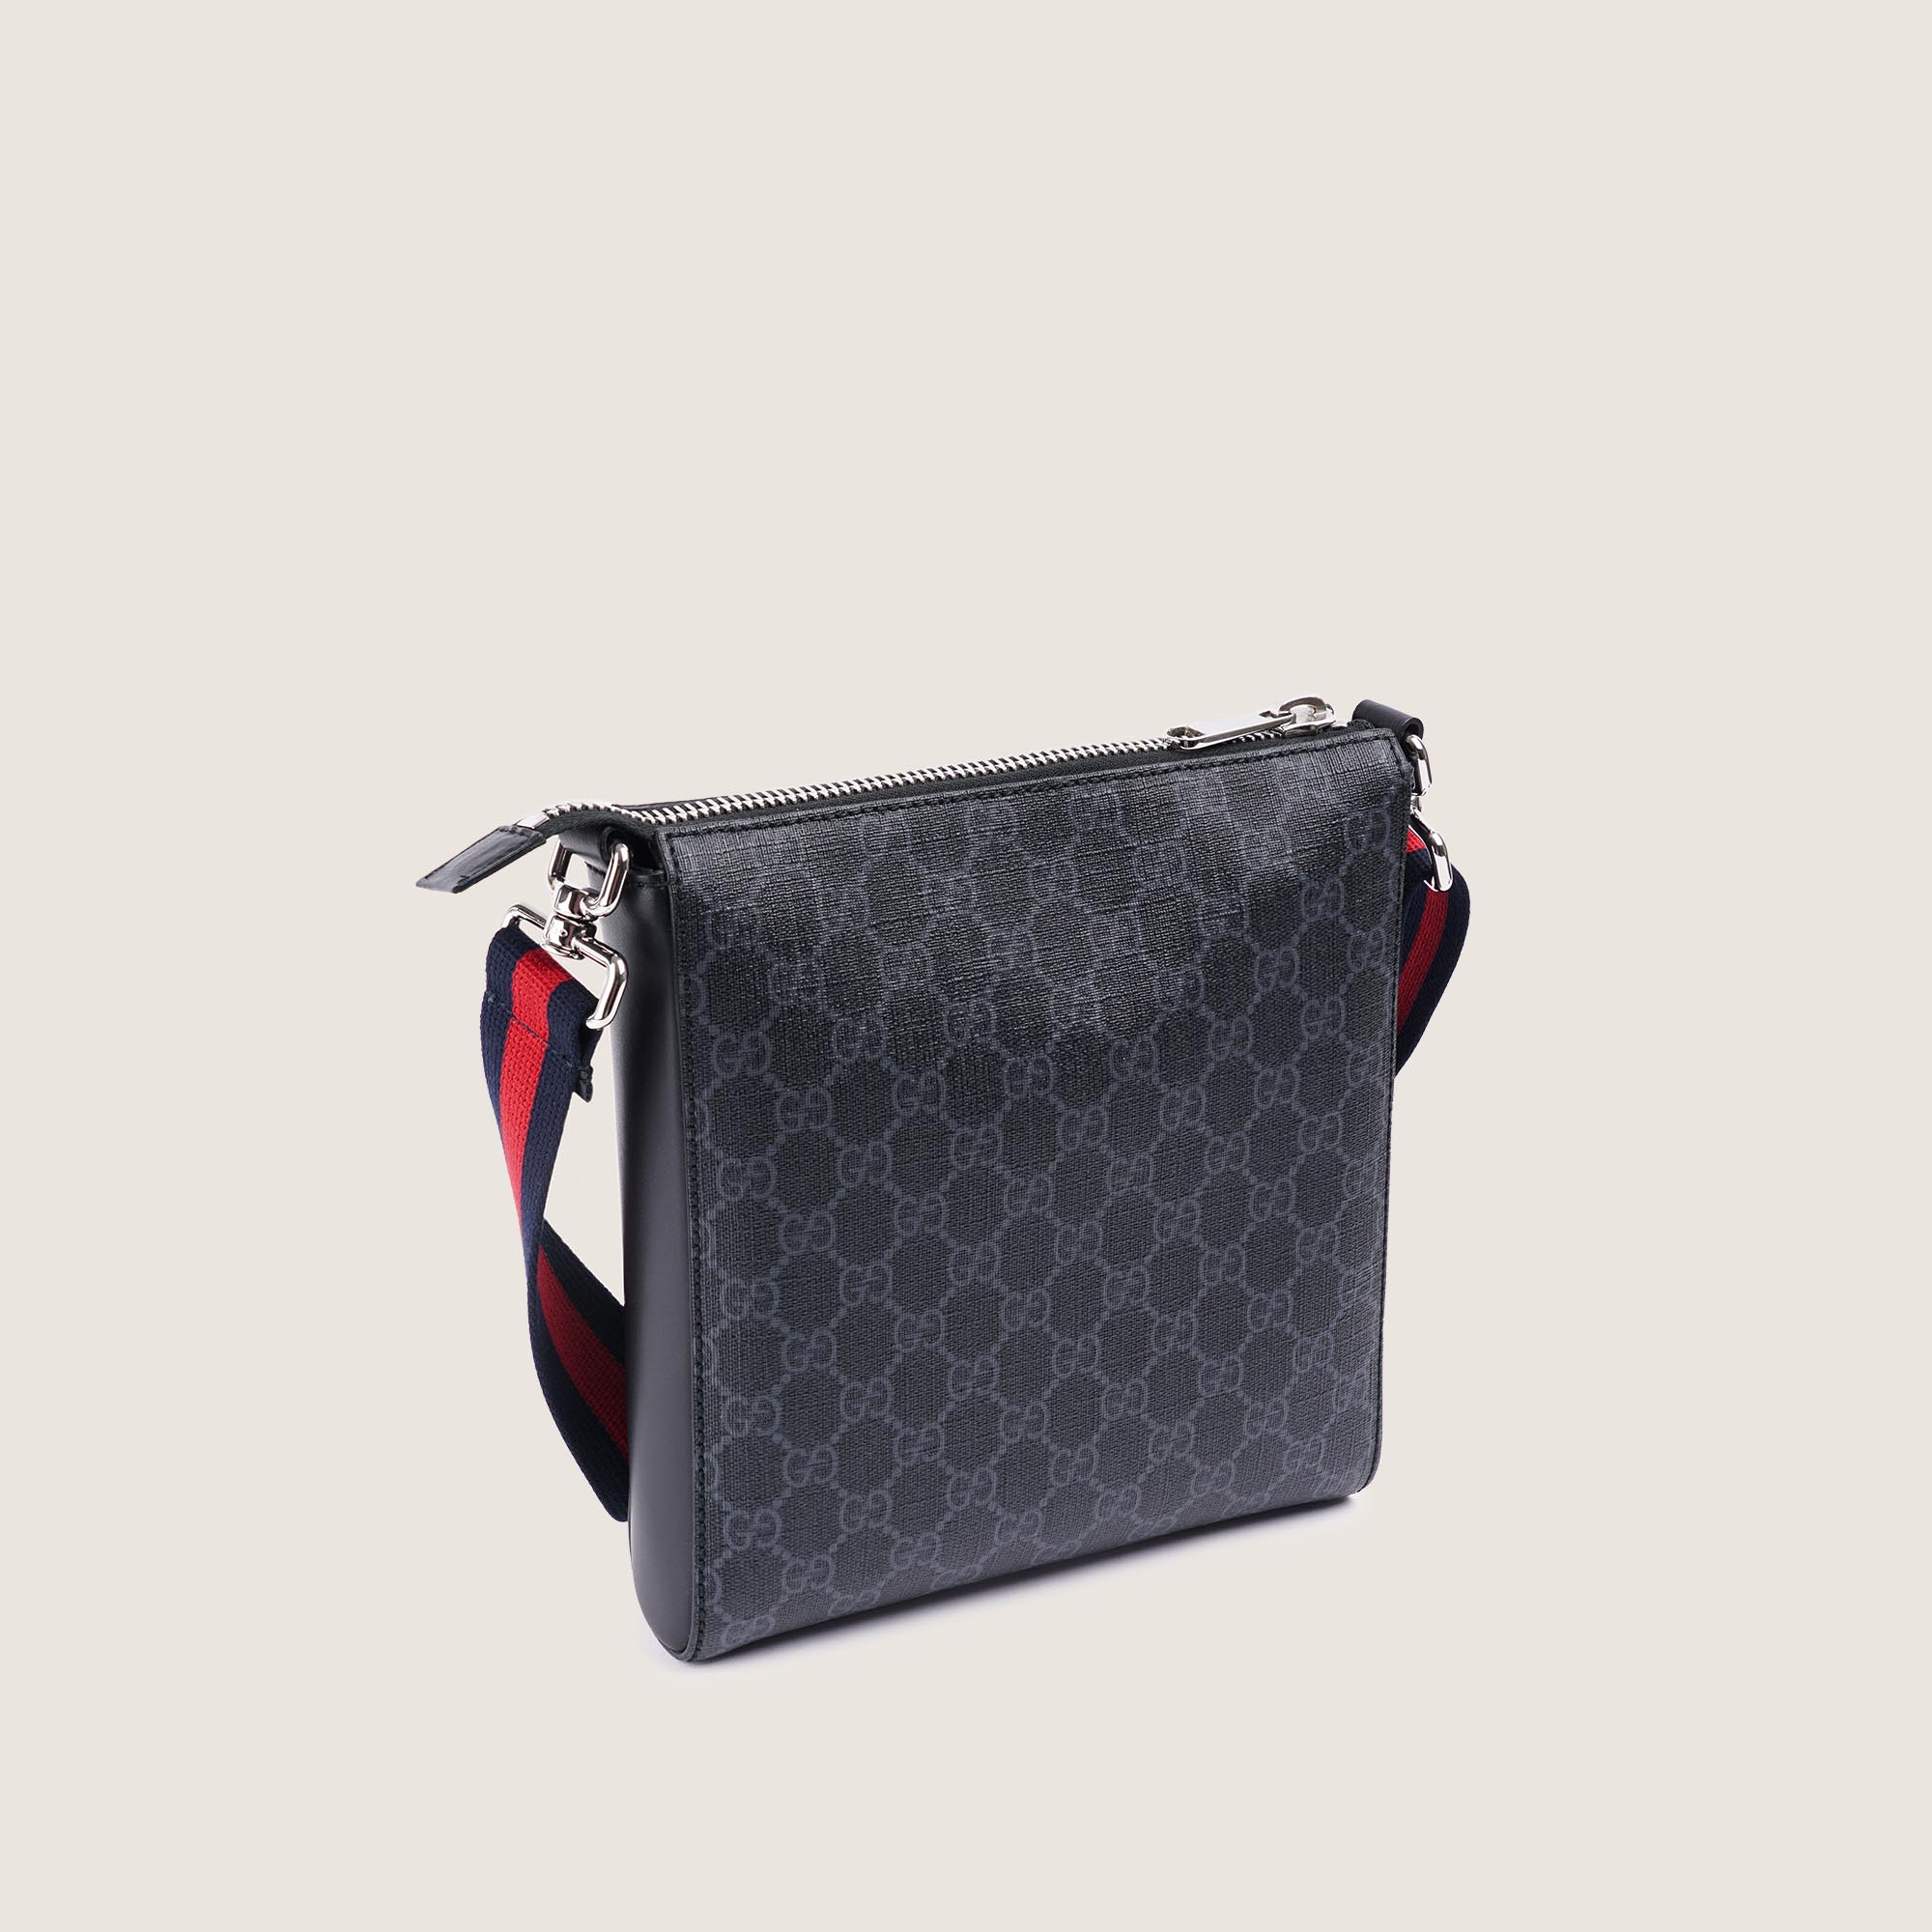 GG Black Messenger - GUCCI - Affordable Luxury